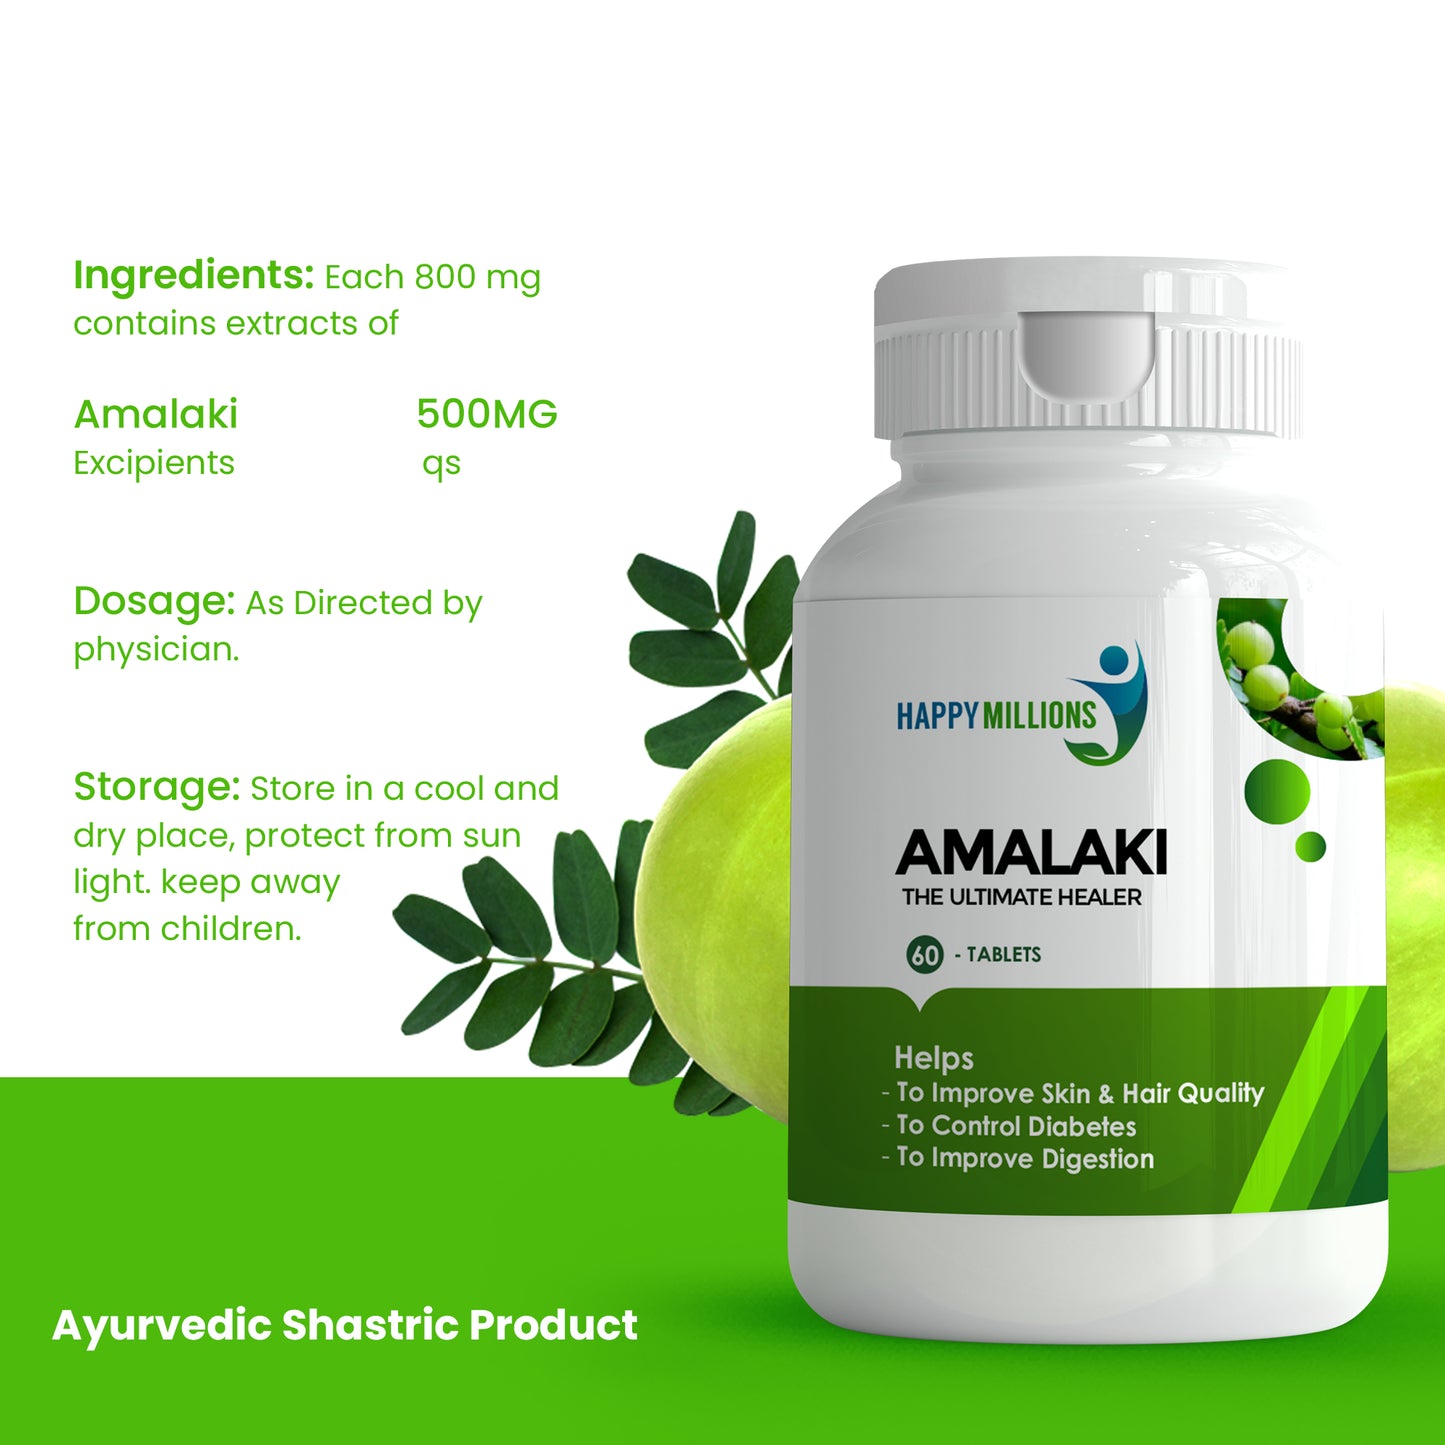 Discover the Power of Happy Millions Amalaki Key Ingredients, Recommended Dosage, and Storage Tips for Enhanced Immunity and Digestive Health.